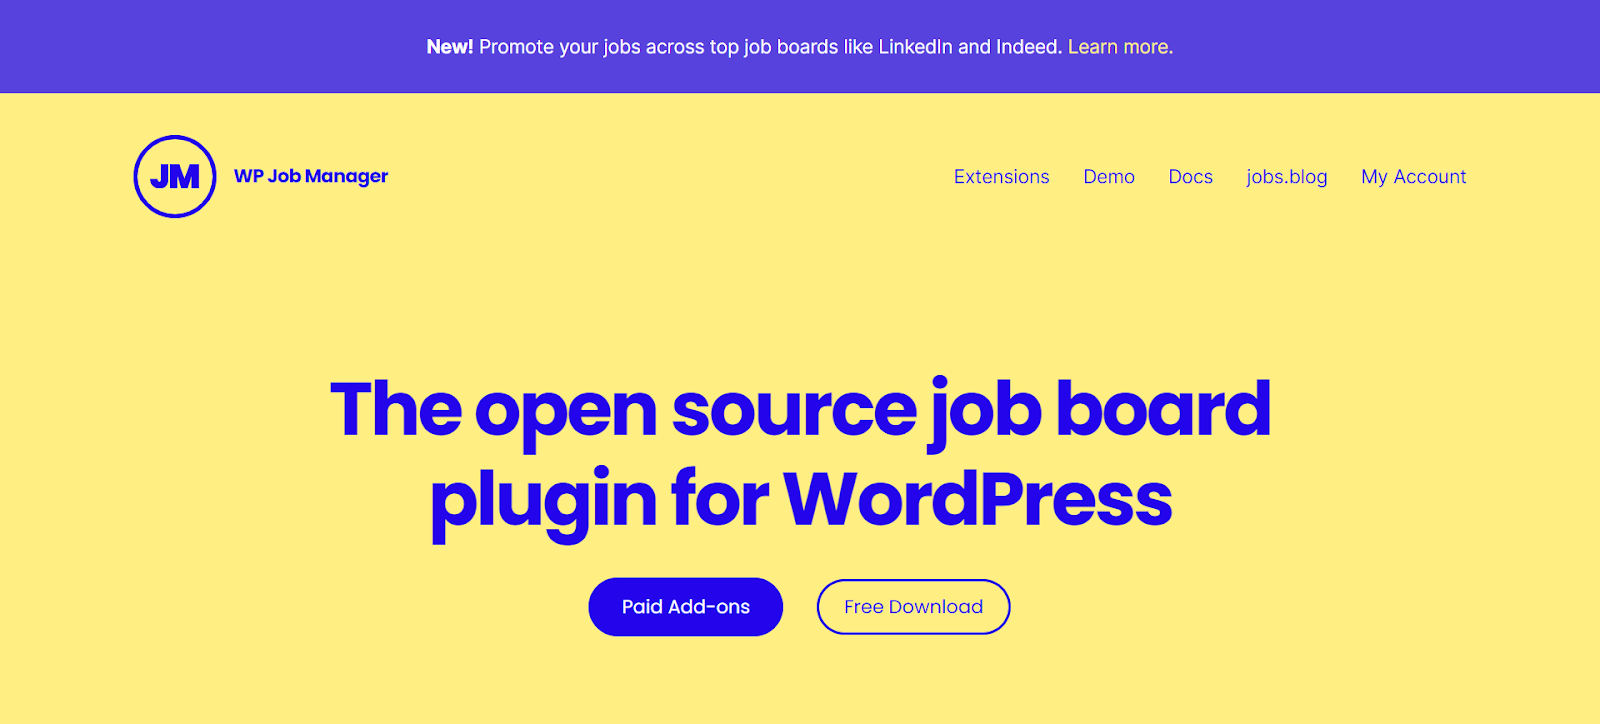  WP Job Manager is a free open-source job board plugin for WordPress.